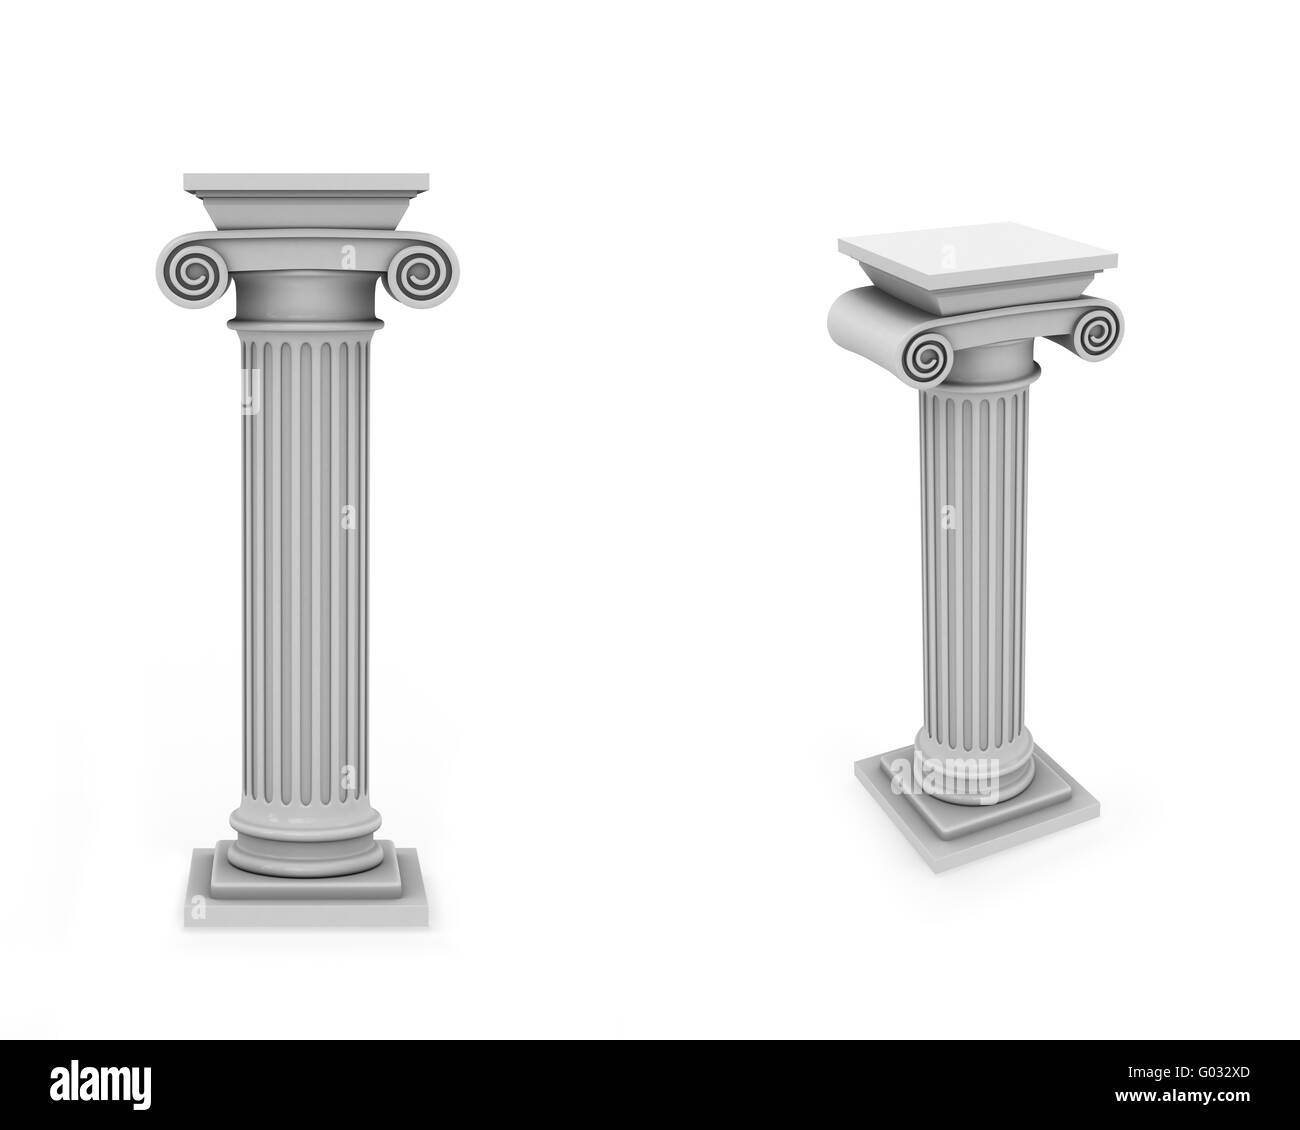 Marble roman columns frontal and diagonal view iso Stock Photo